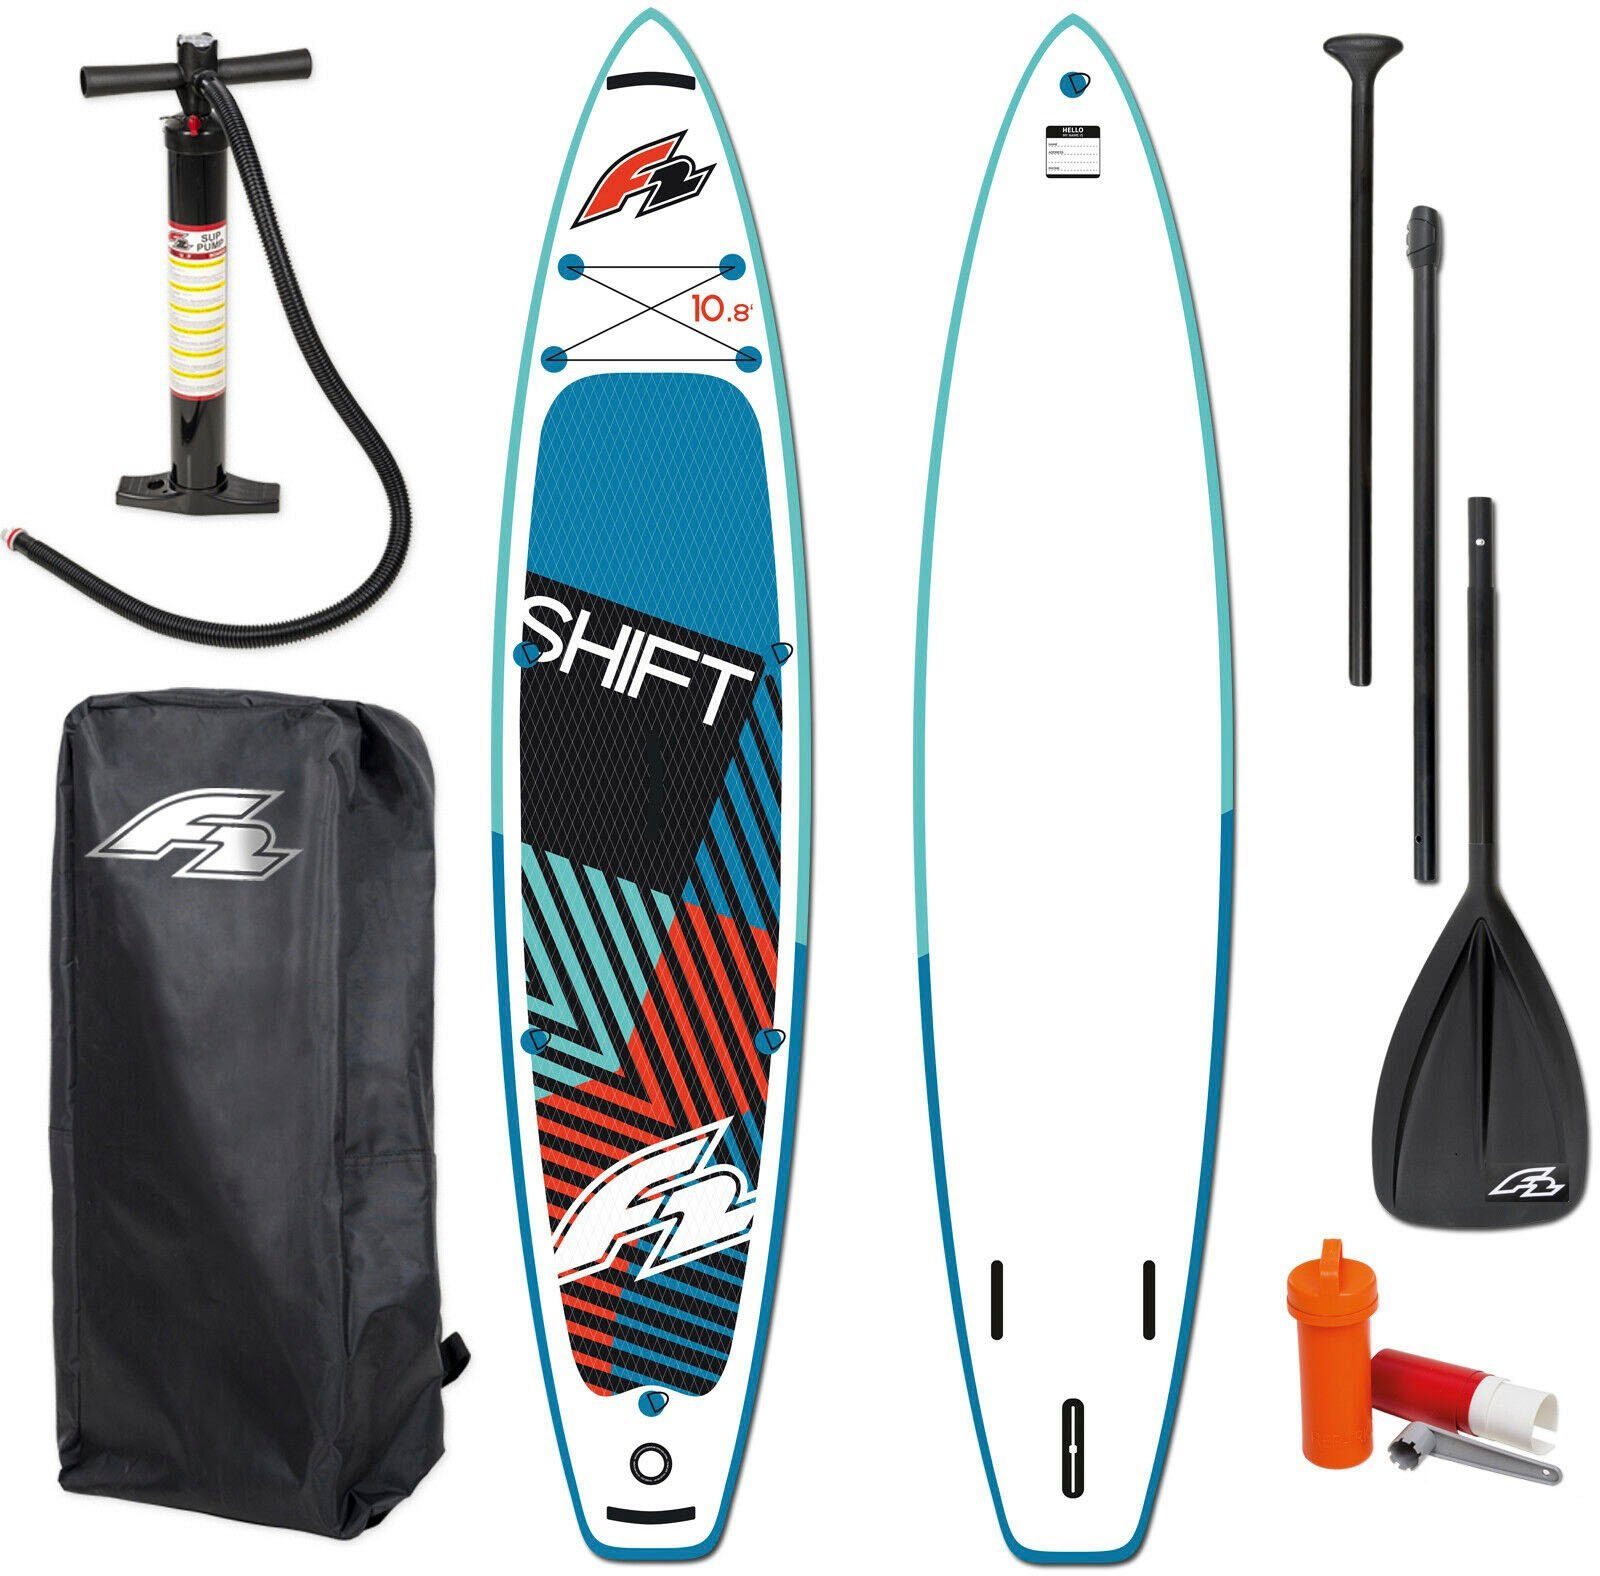 SUP-Board 10,8, F2 Inflatable tlg) 5 (Packung, Shift